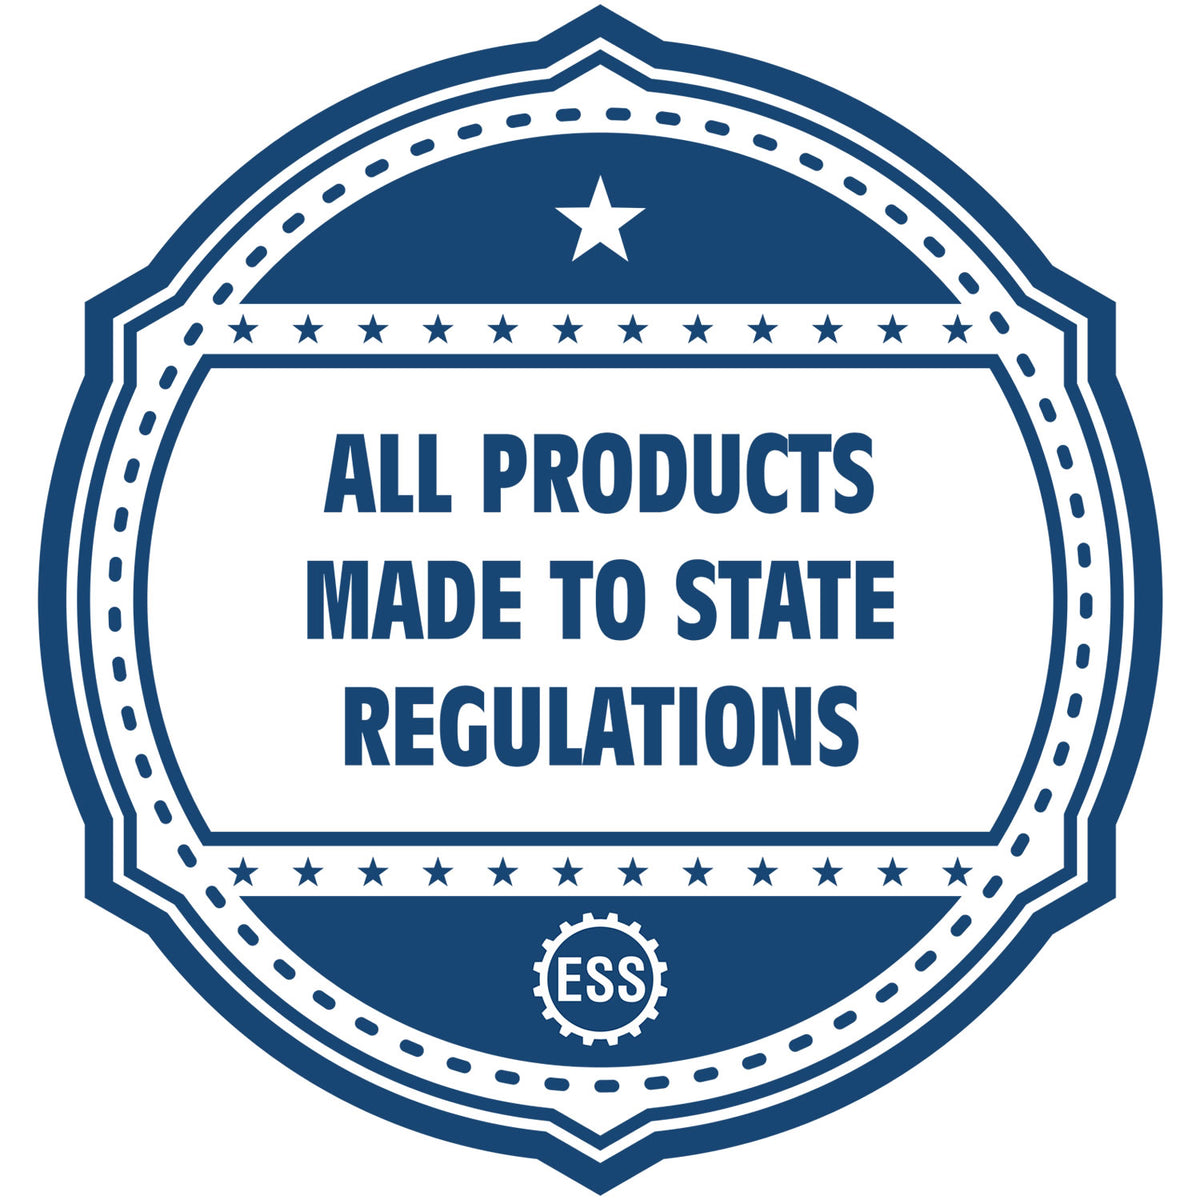 A blue icon or badge for the Gift New Hampshire Engineer Seal showing that this product is made in compliance with state regulations.